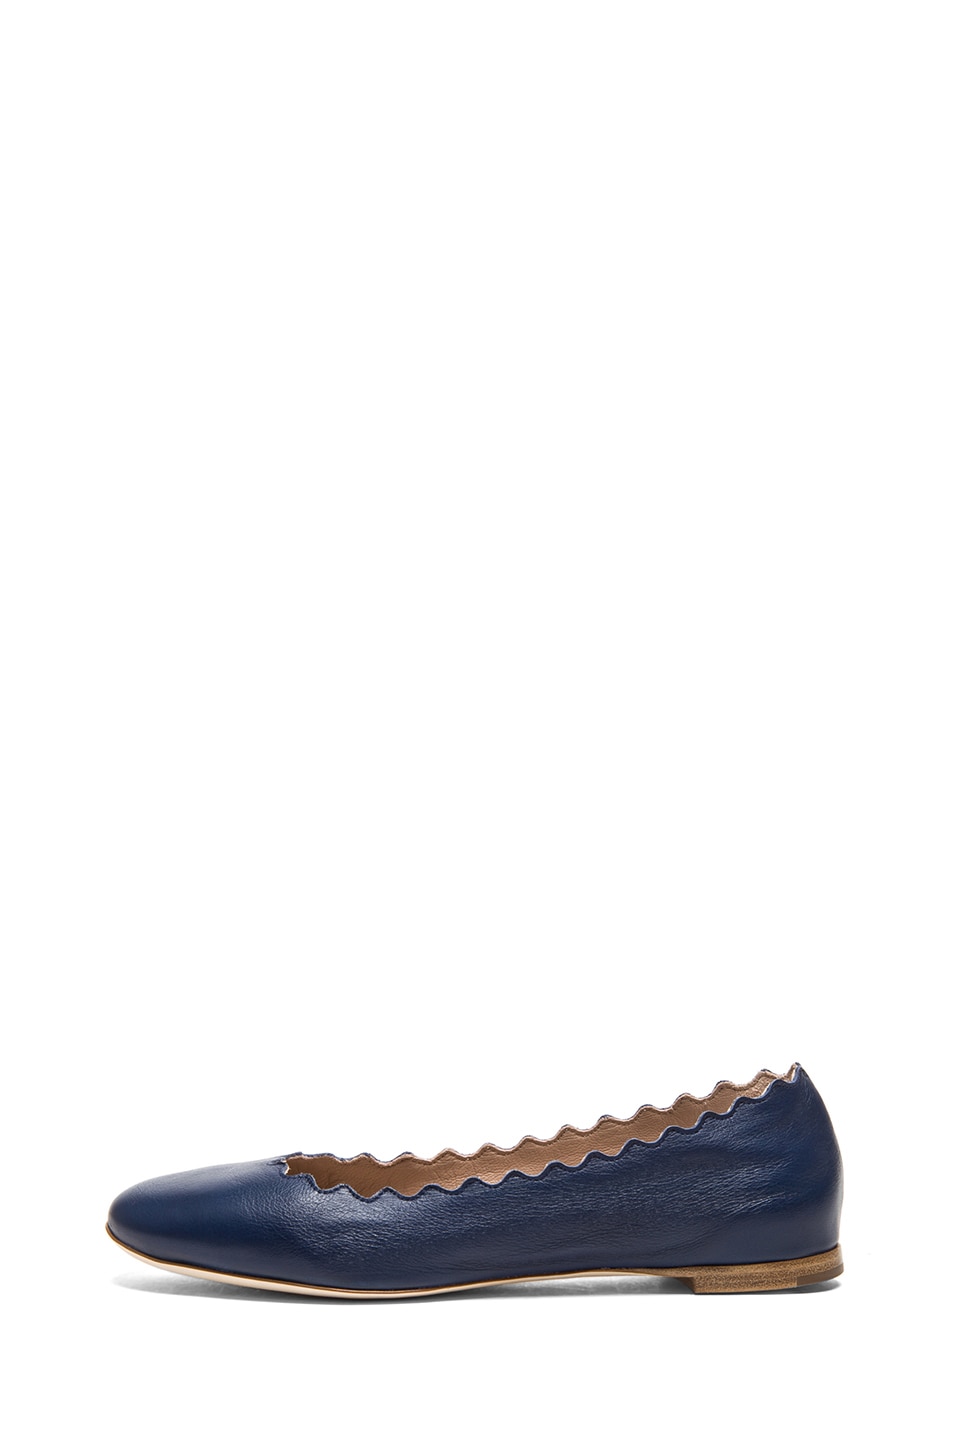 Image 1 of Chloe Lambskin Leather Scalloped Flats in Royal Navy